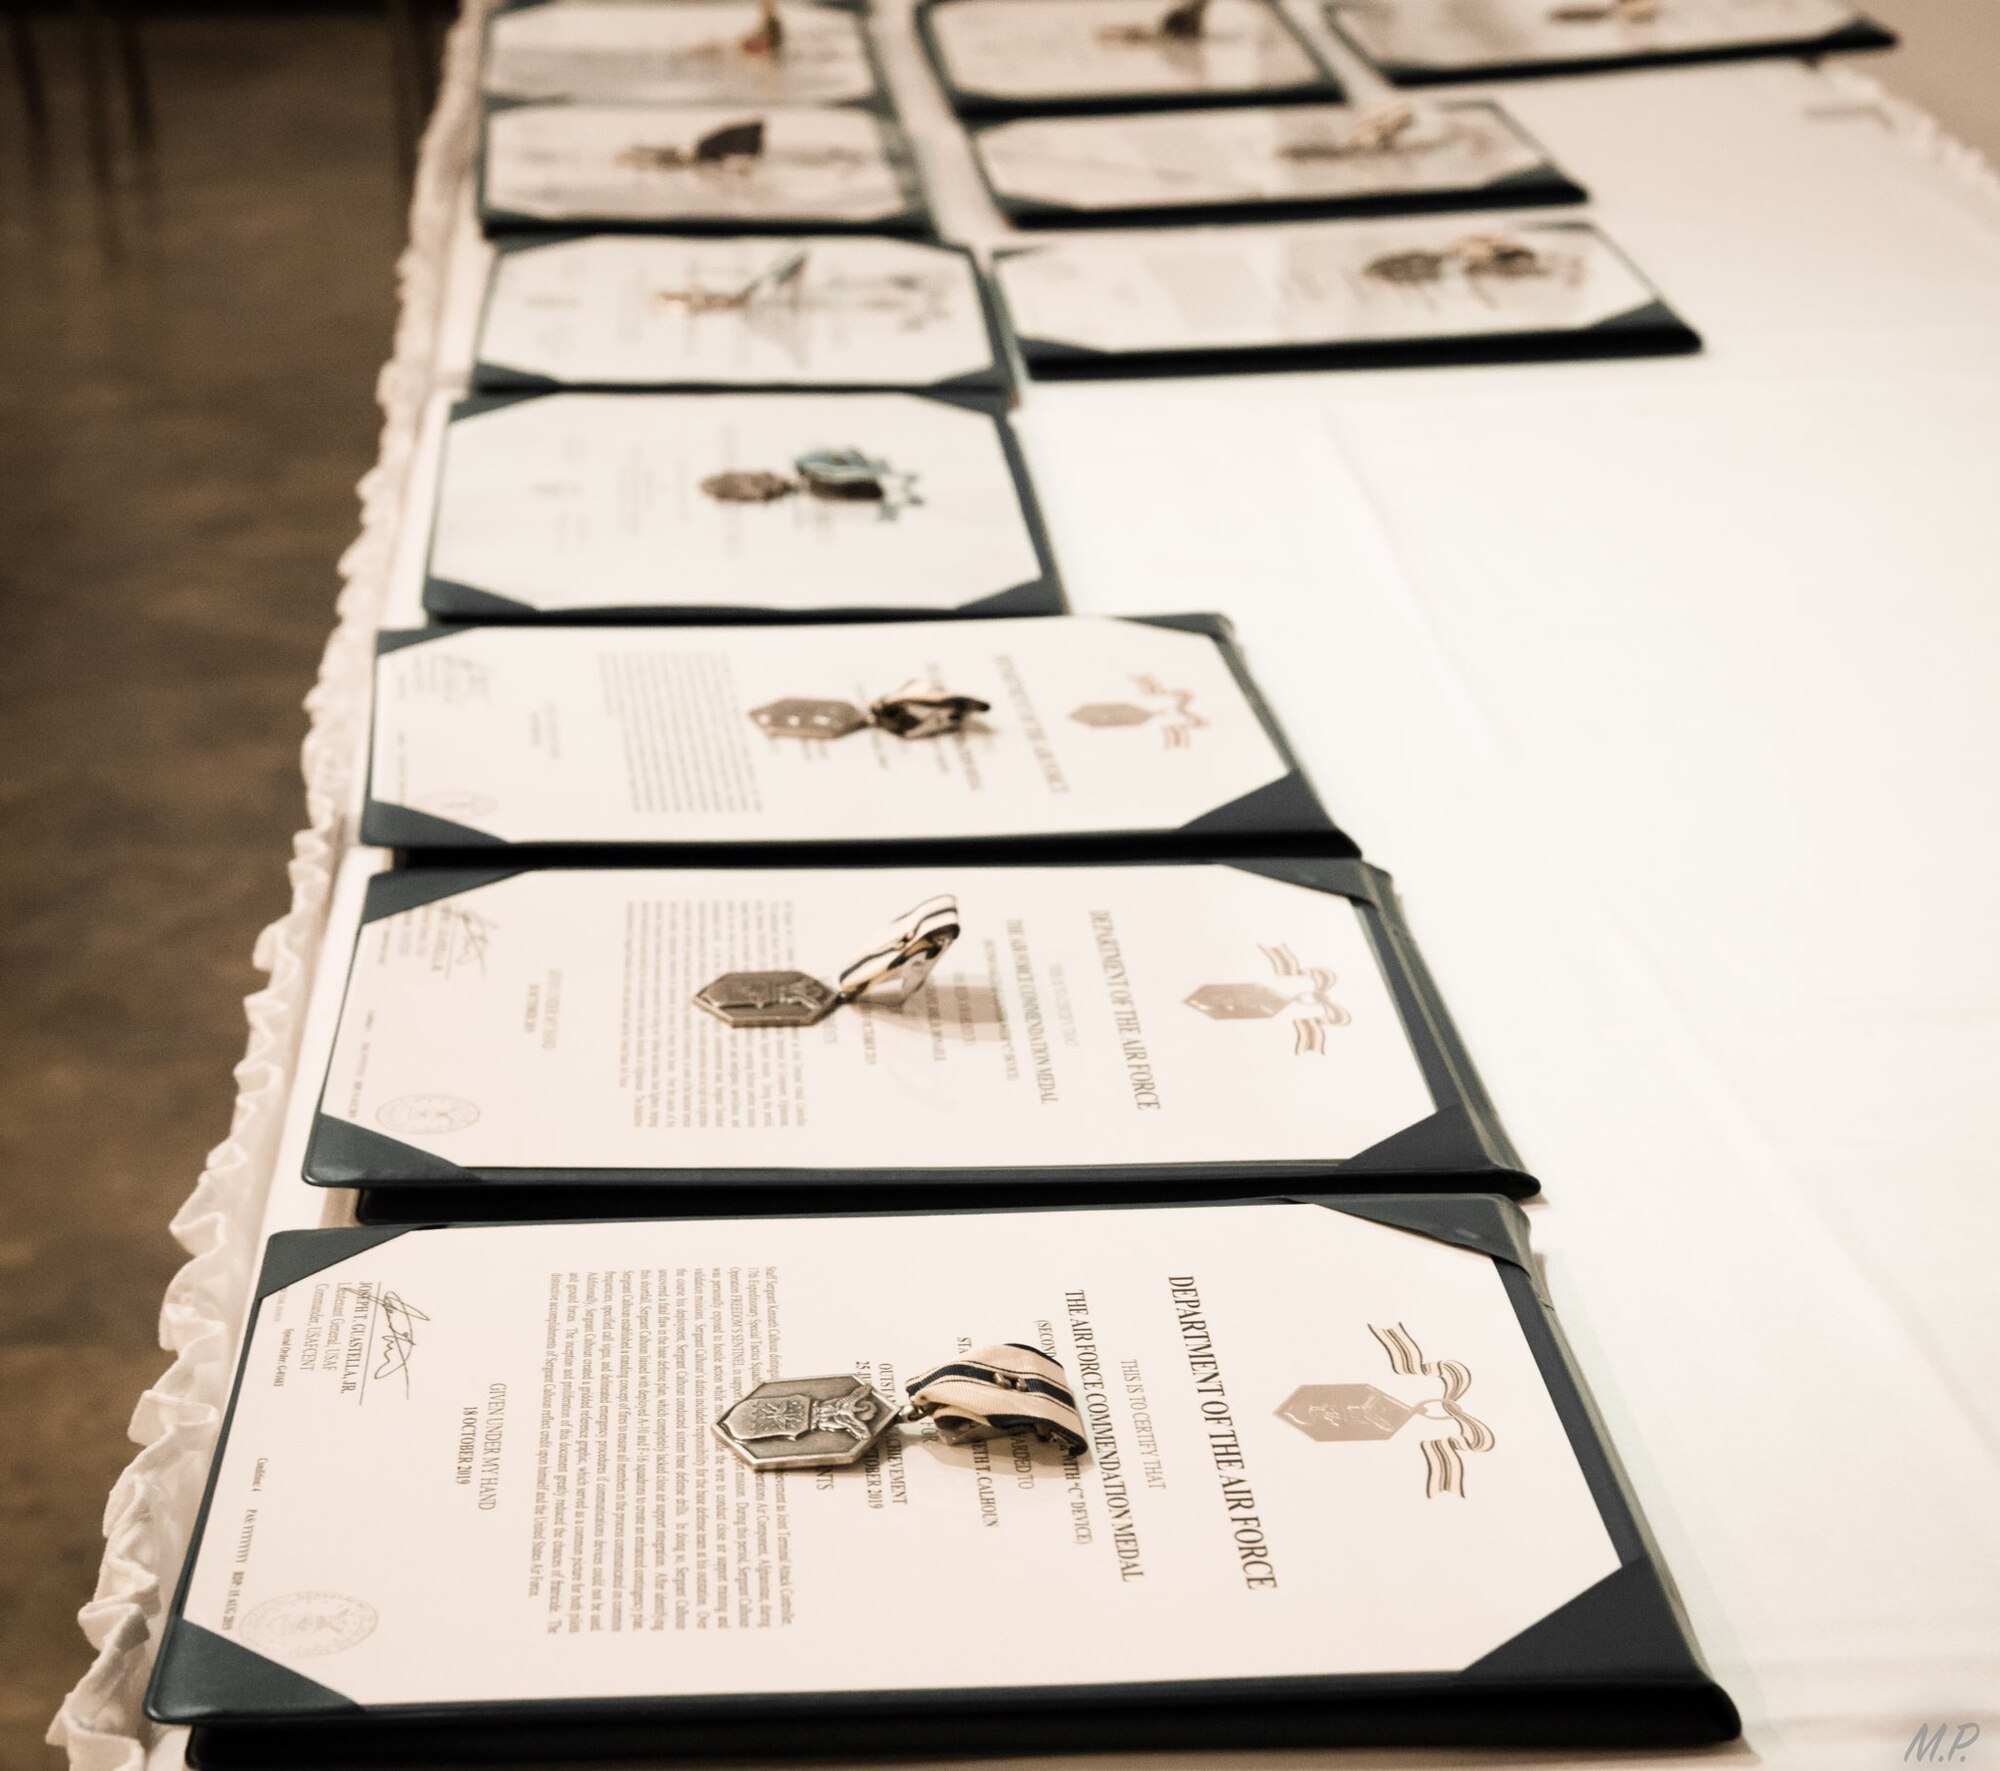 Awards lay on a table at the Museum of the Mighty Eighth Air Force in Savannah, Georgia, for a valorous awards ceremony honoring the achievements of Special Tactics Airmen from the 17th Special Tactics Squadron’s Detachment 1 Feb. 18, 2020.